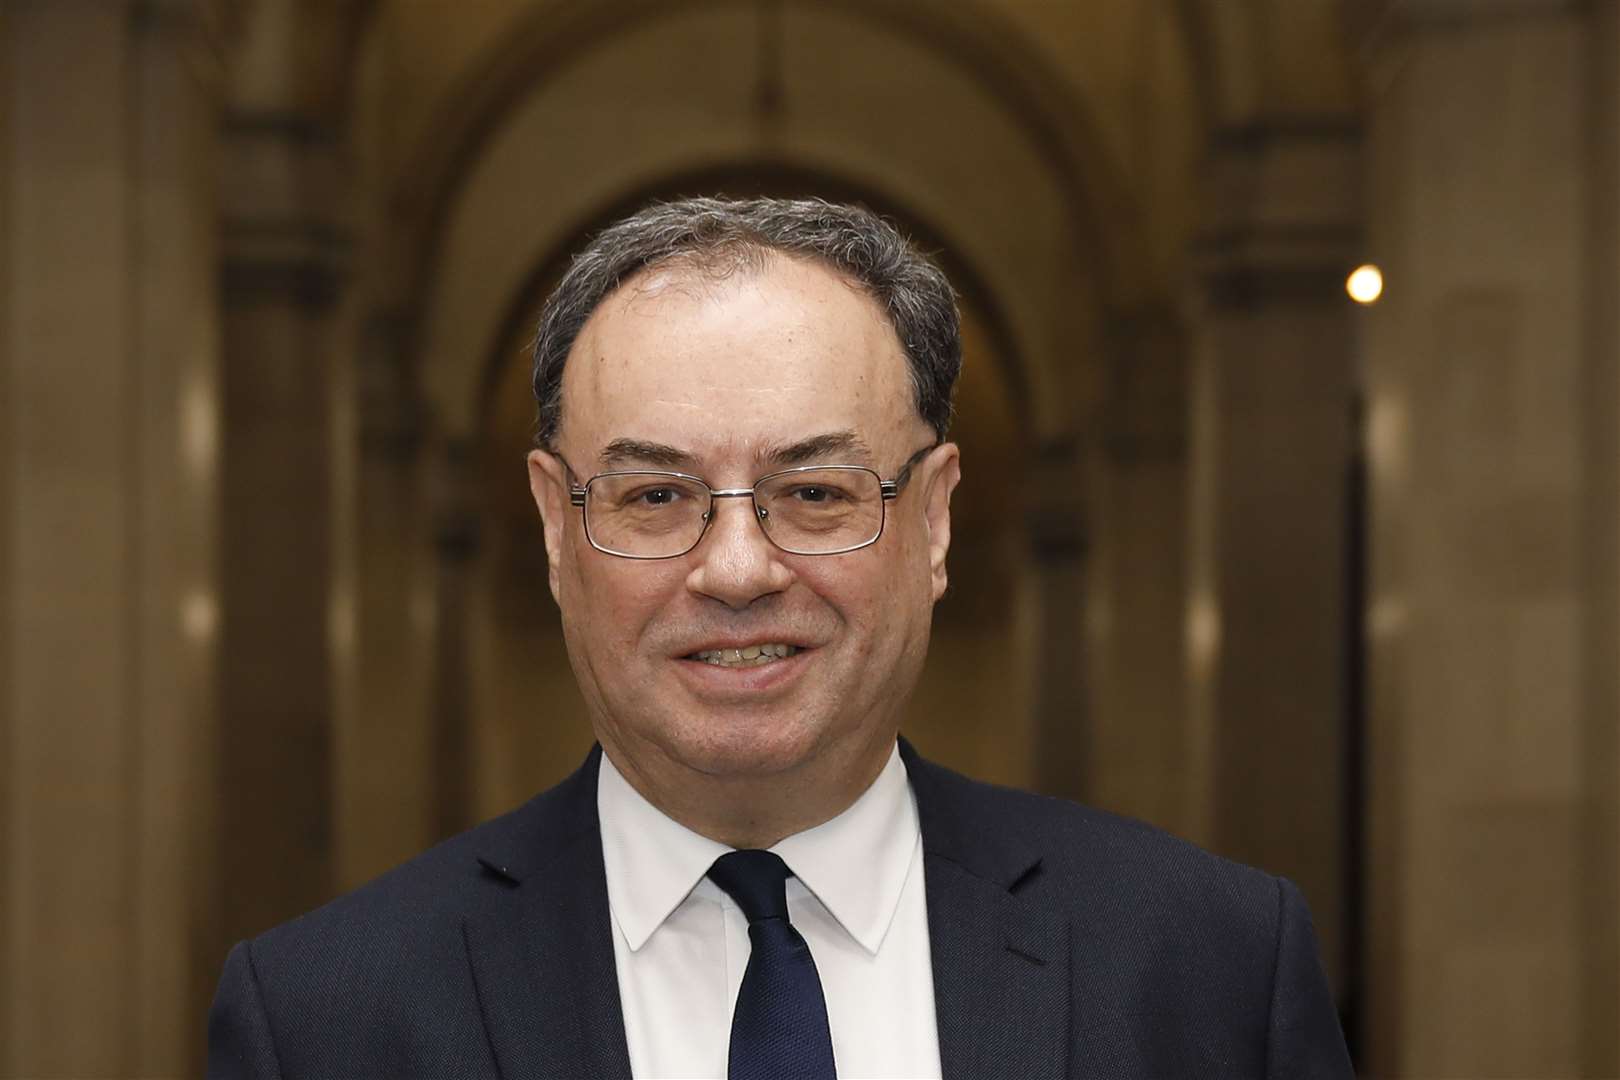 Andrew Bailey reportedly told bank bosses to increase no-deal Brexit planning (Tolga Akmen/PA)